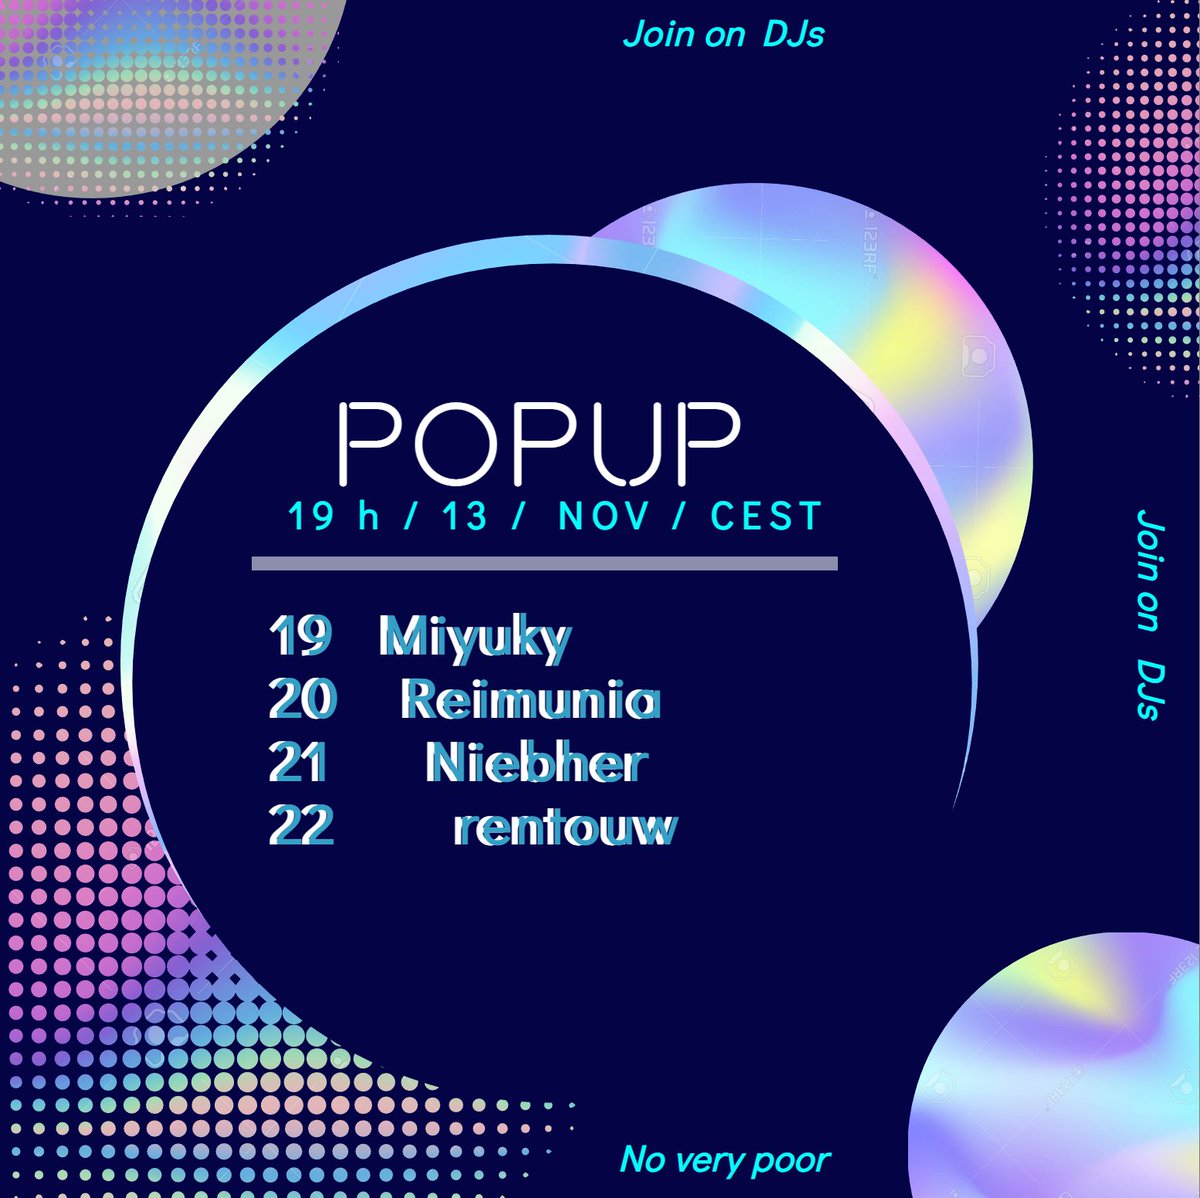 Popup today, good tunes by Rei @rentouw and Niebher